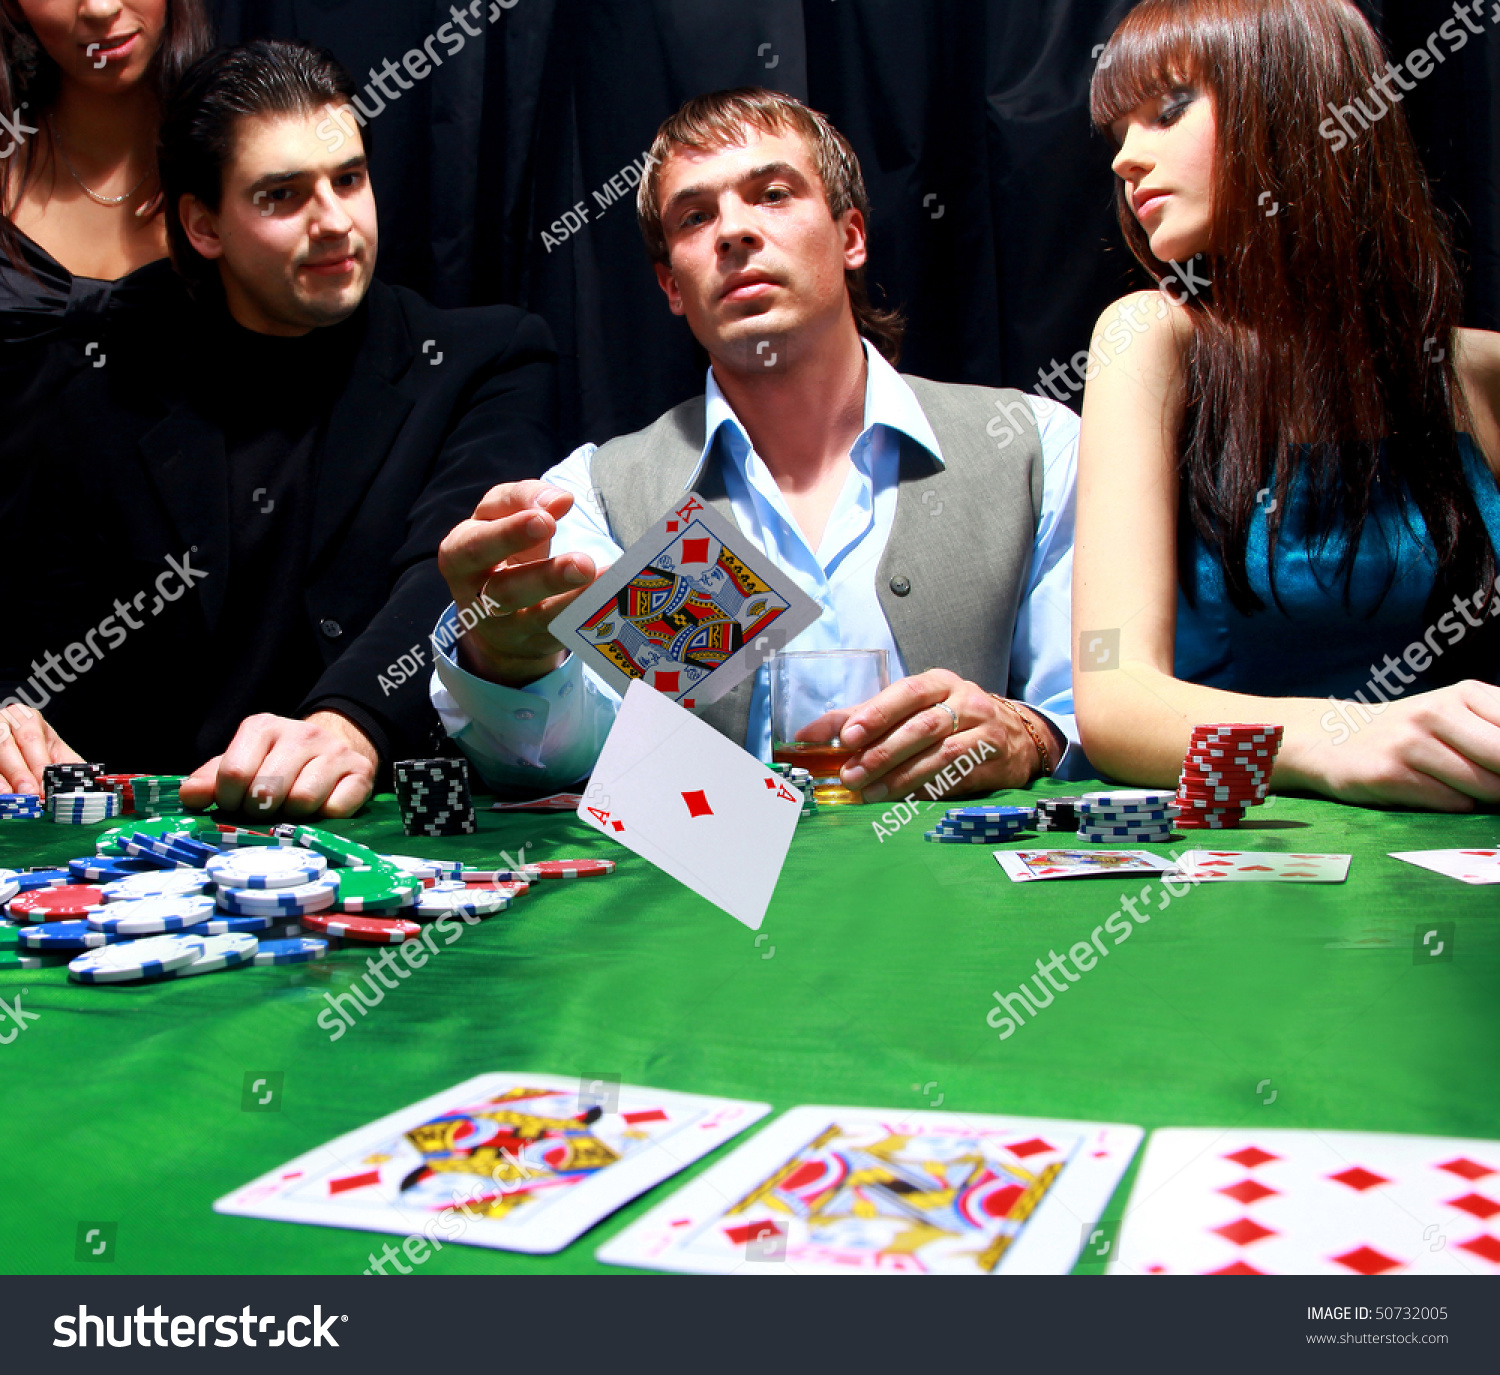 Young man throwing chips on the table while playing cards